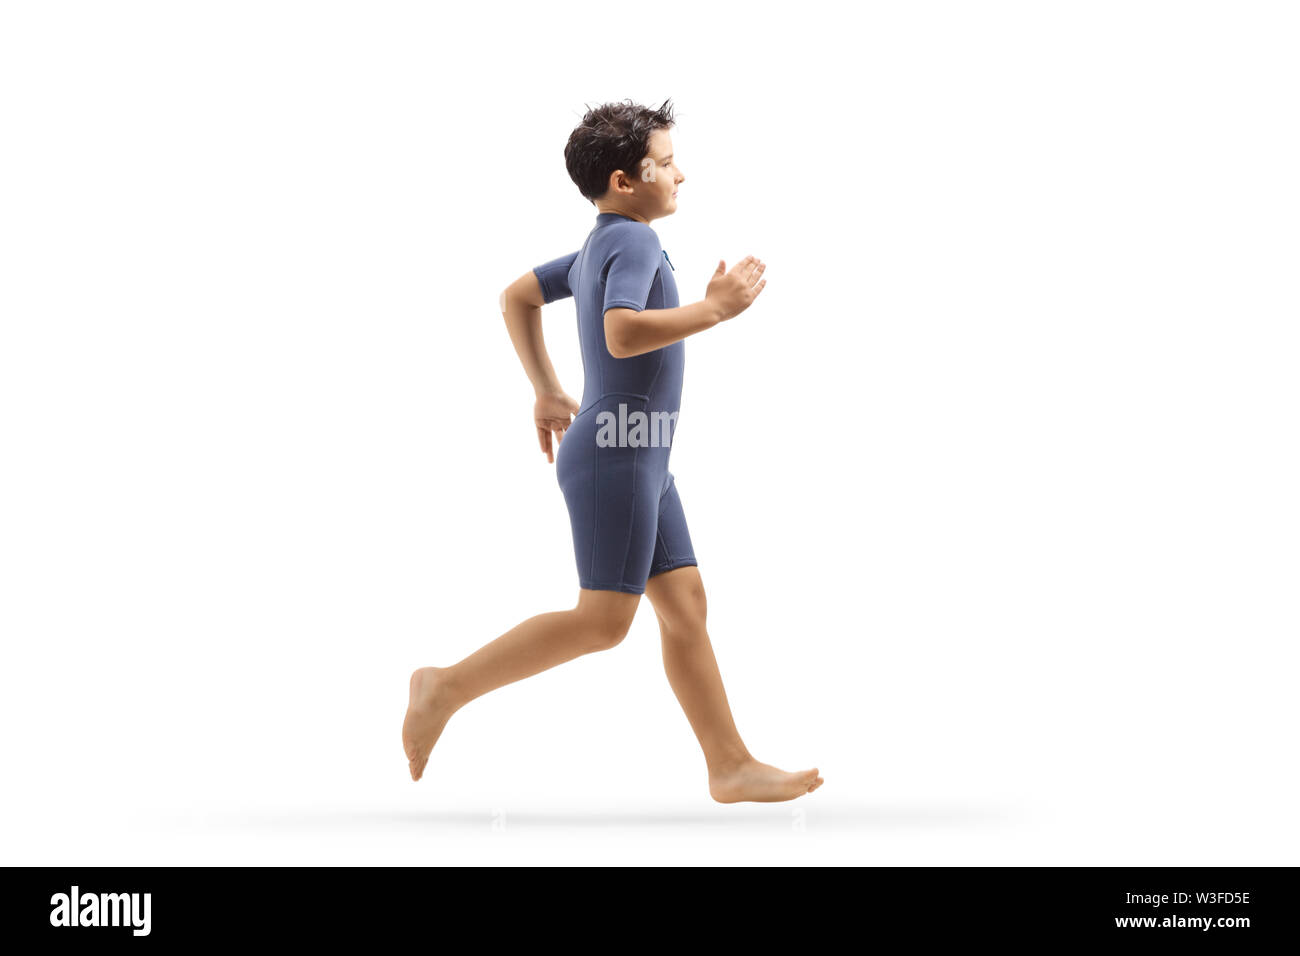 Full length profile shot of a boy in a wetsuit running isolated on white background Stock Photo